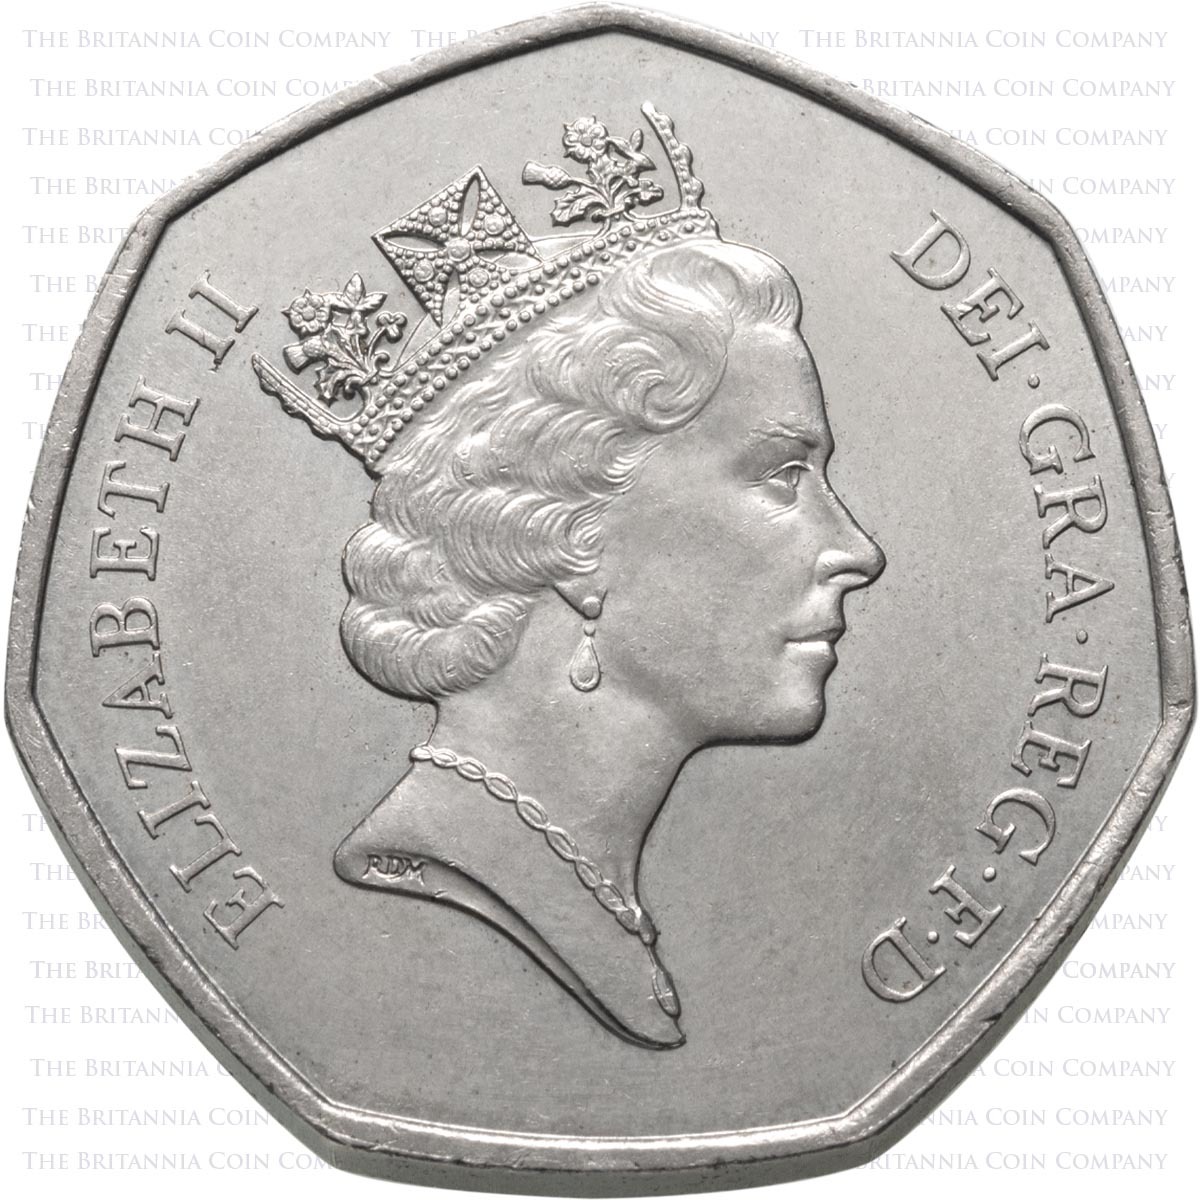 1992-1993 Dual Dated European Presidency Single Market Circulated Fifty Pence Coin Obverse